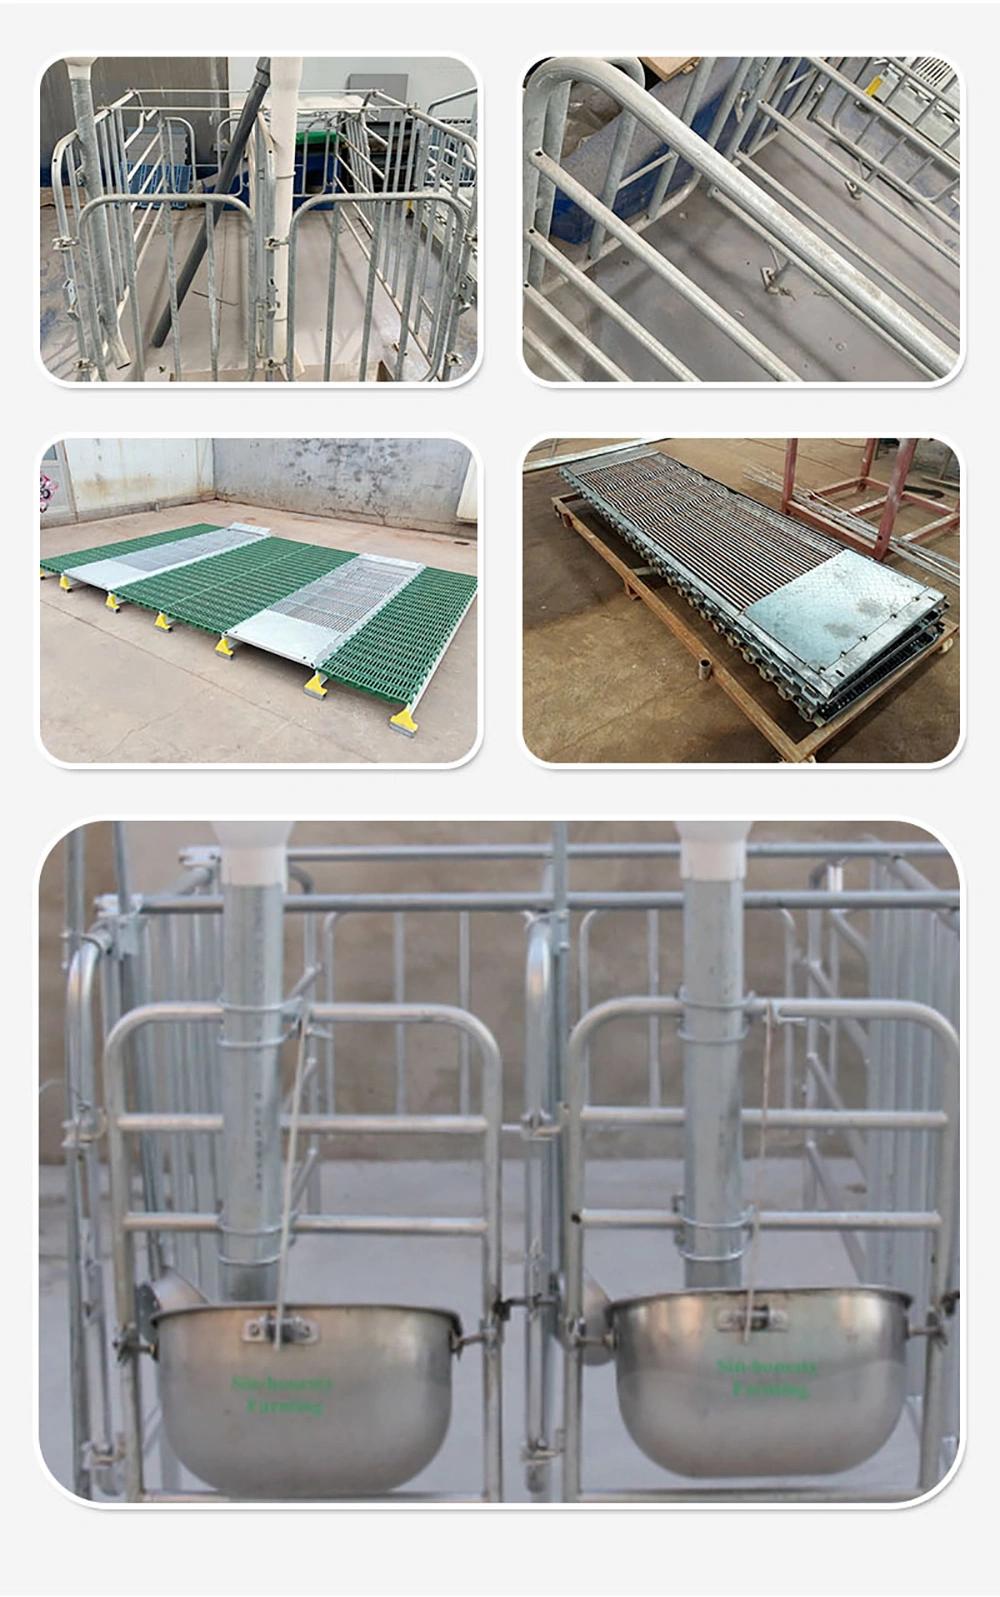 Pig Gestation Crate Pig Farm Equipment Pig Farrowing Crate Sow Crate Gestation Stall